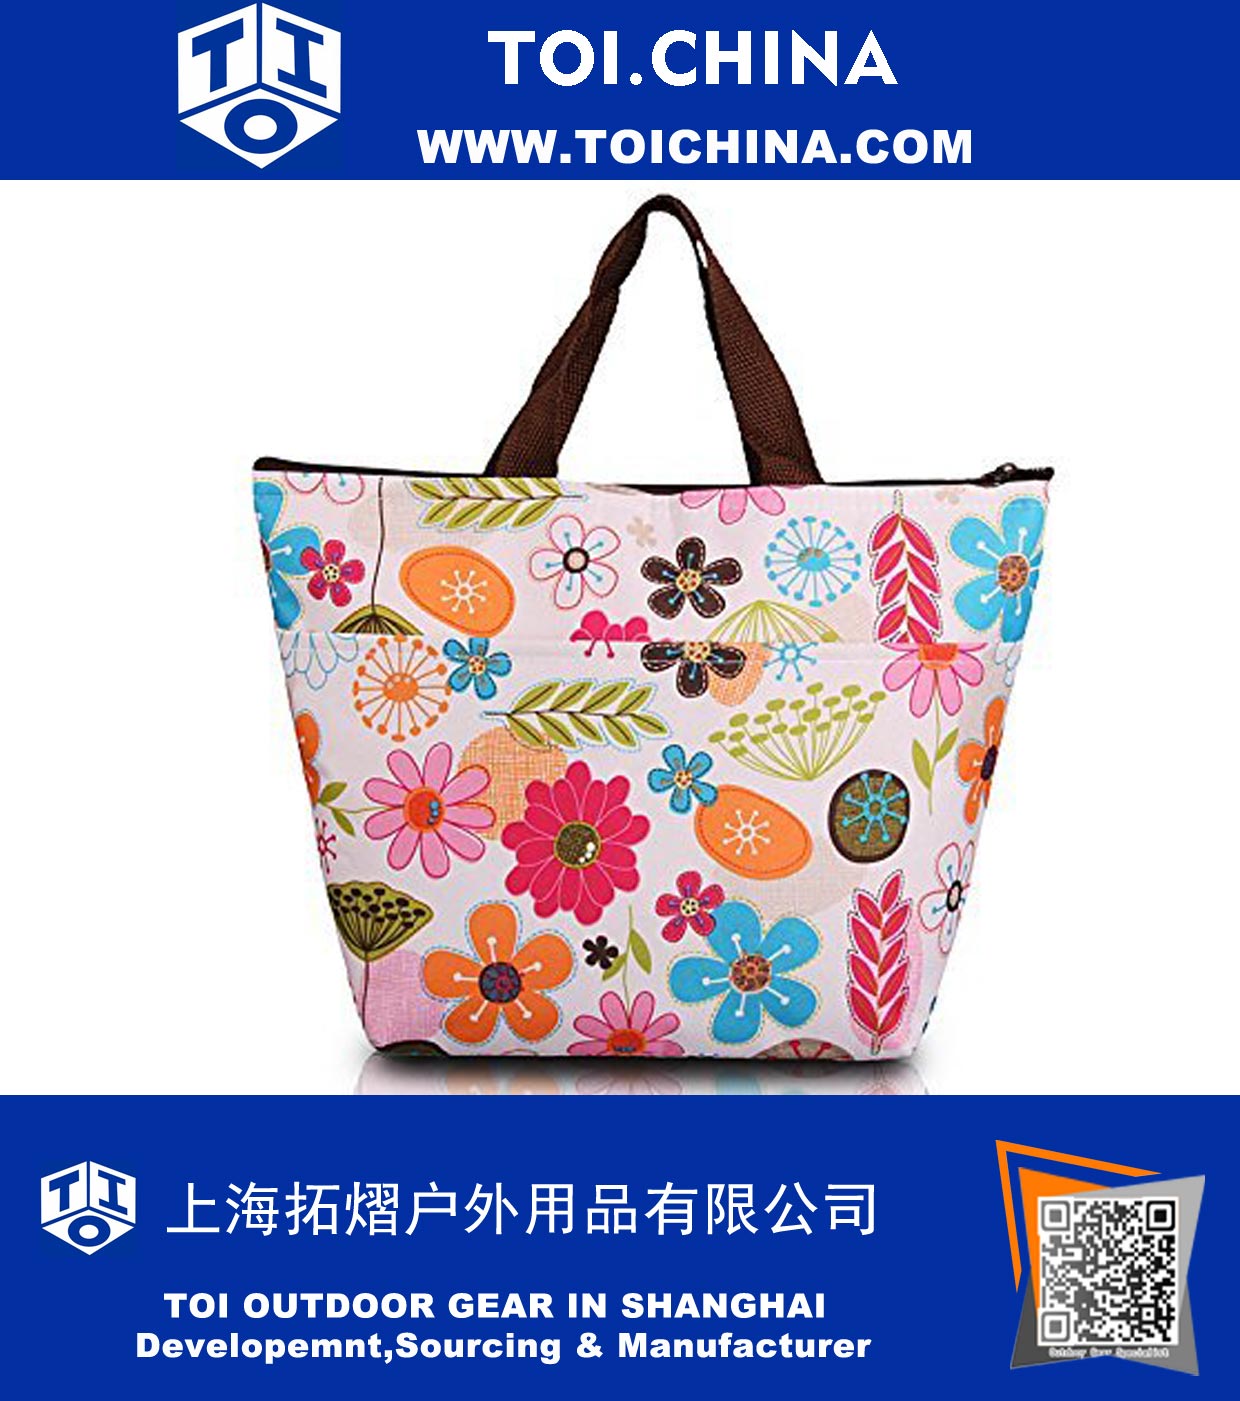 Insulated Lunch Bag Fashion Cute Waterproof Picnic Dinner Reusable Bento Box Holder Case Container Tote Bags Cooler Travel Zipper Organizer, Flower